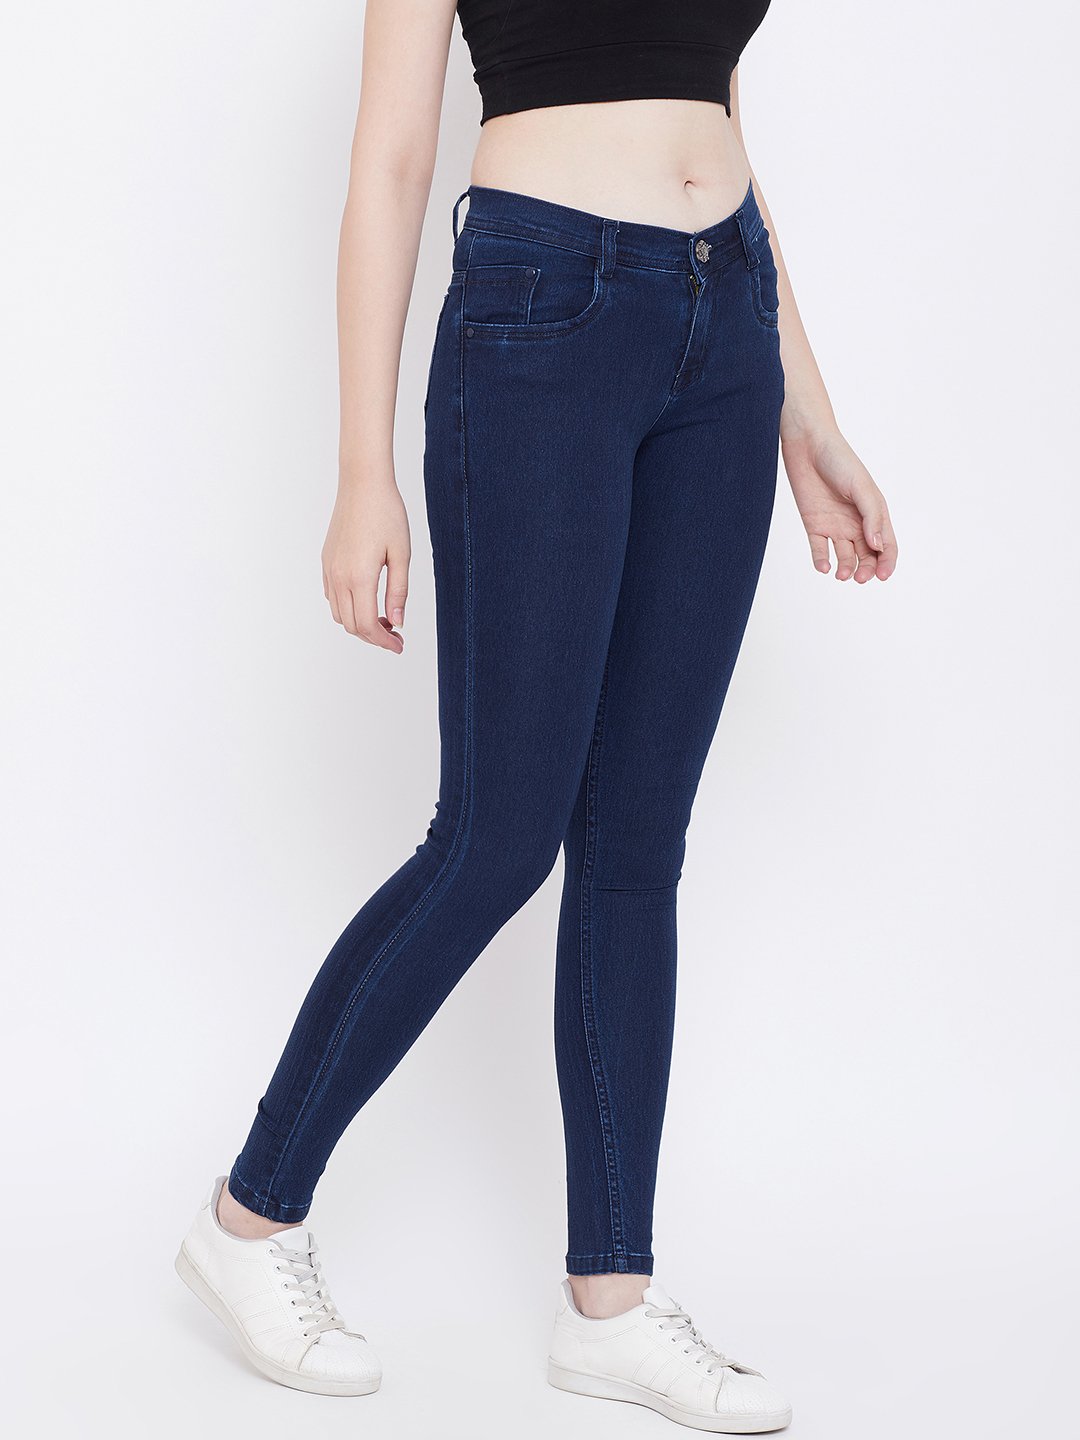 Slim Fit Stretchable Basic Blue Jeans - NiftyJeans